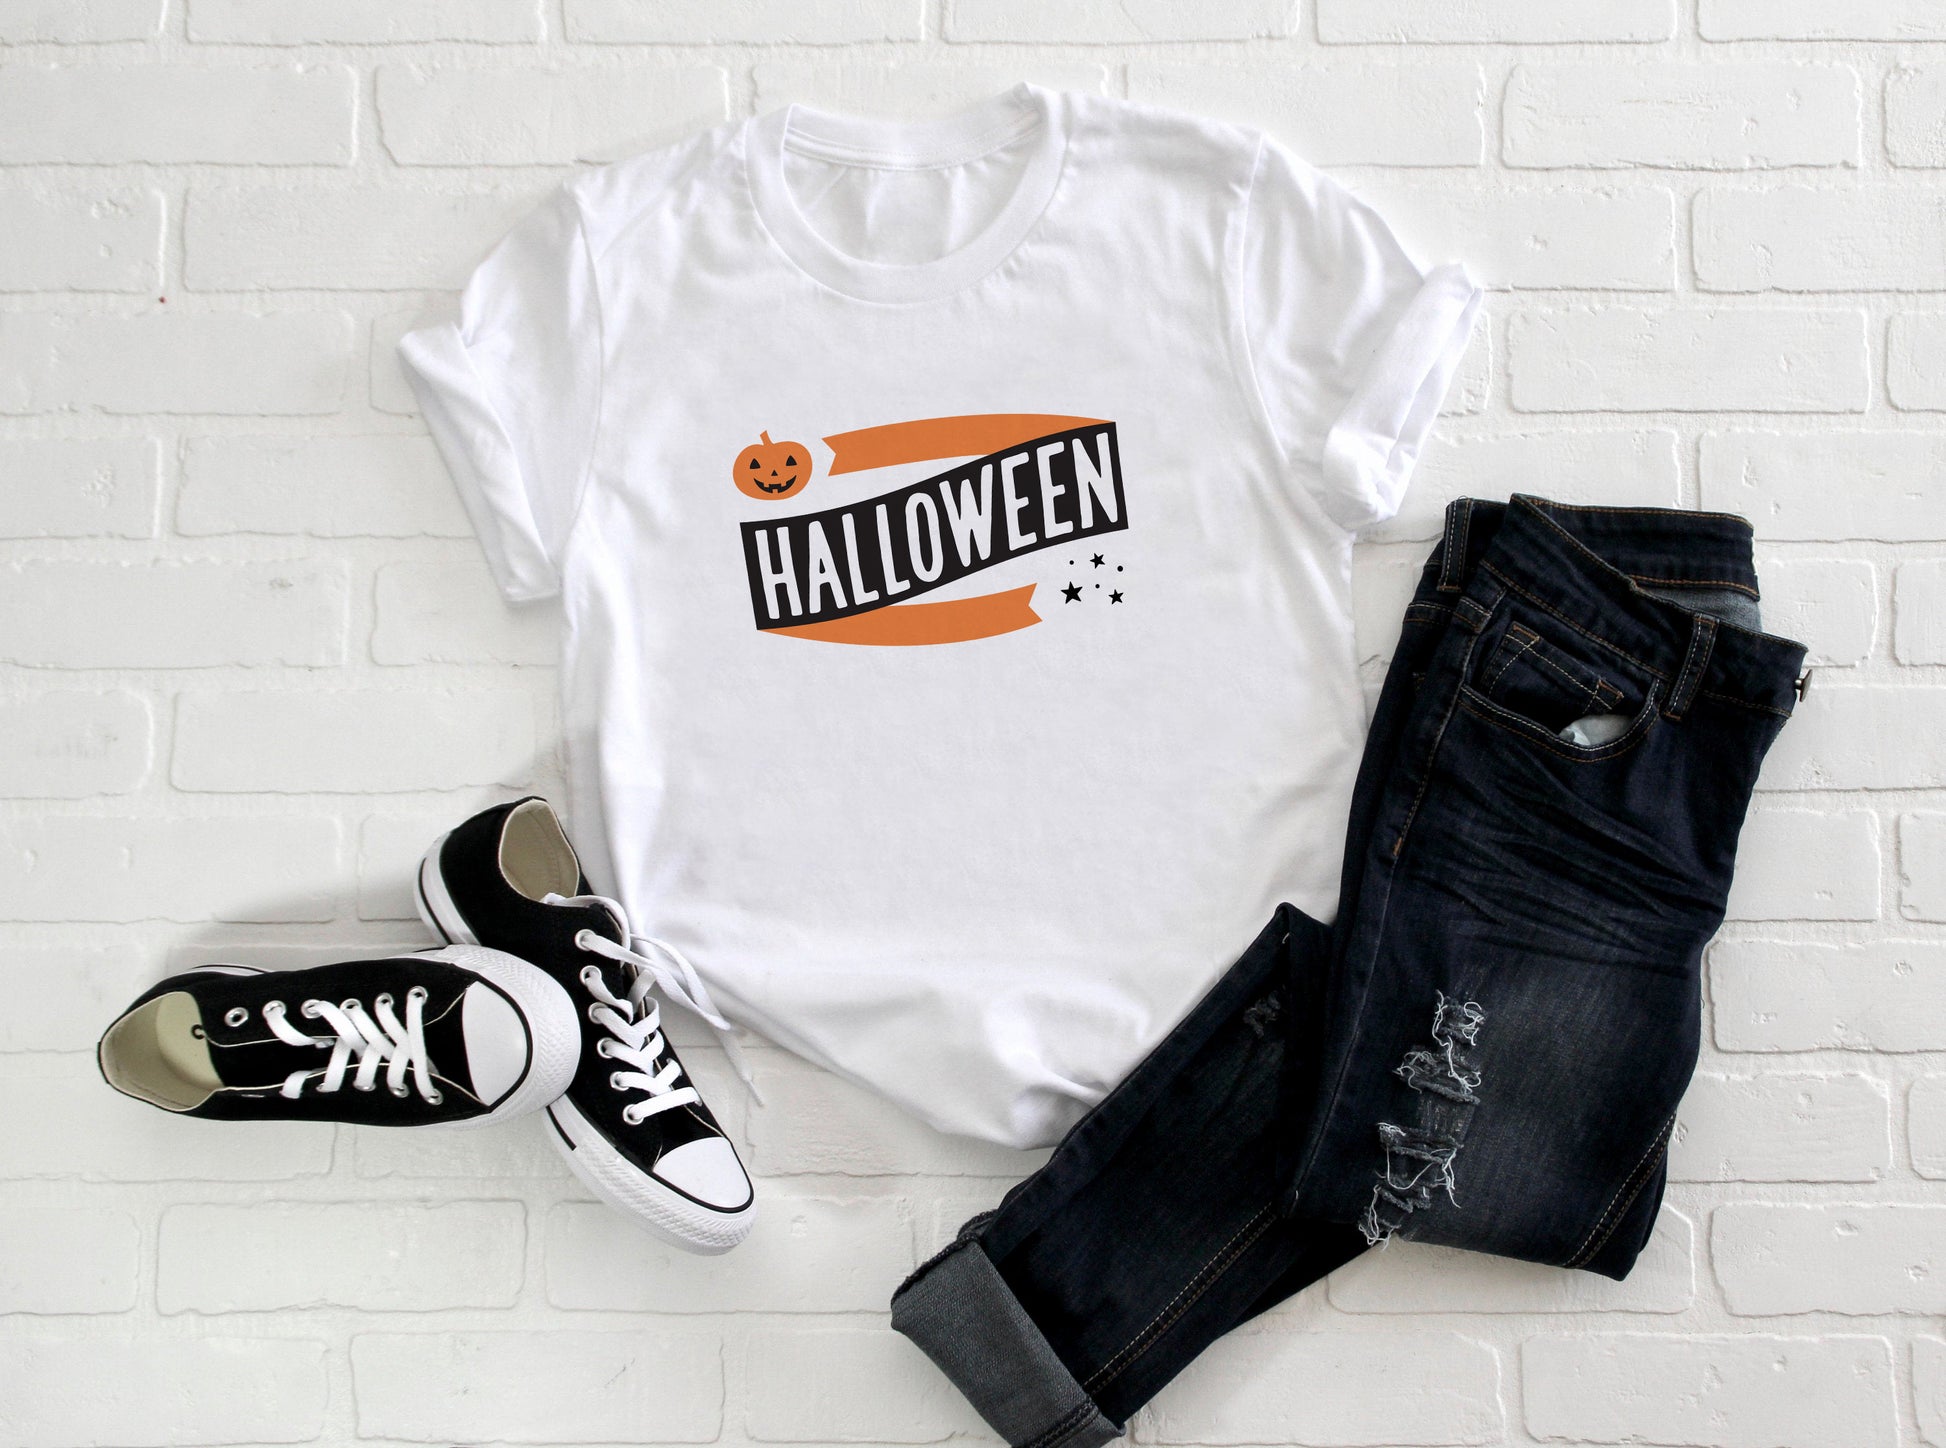 Halloween Banner Pumpkin and Stars Short-Sleeve Unisex T-Shirt (more colors available) - Next Stop Main Street